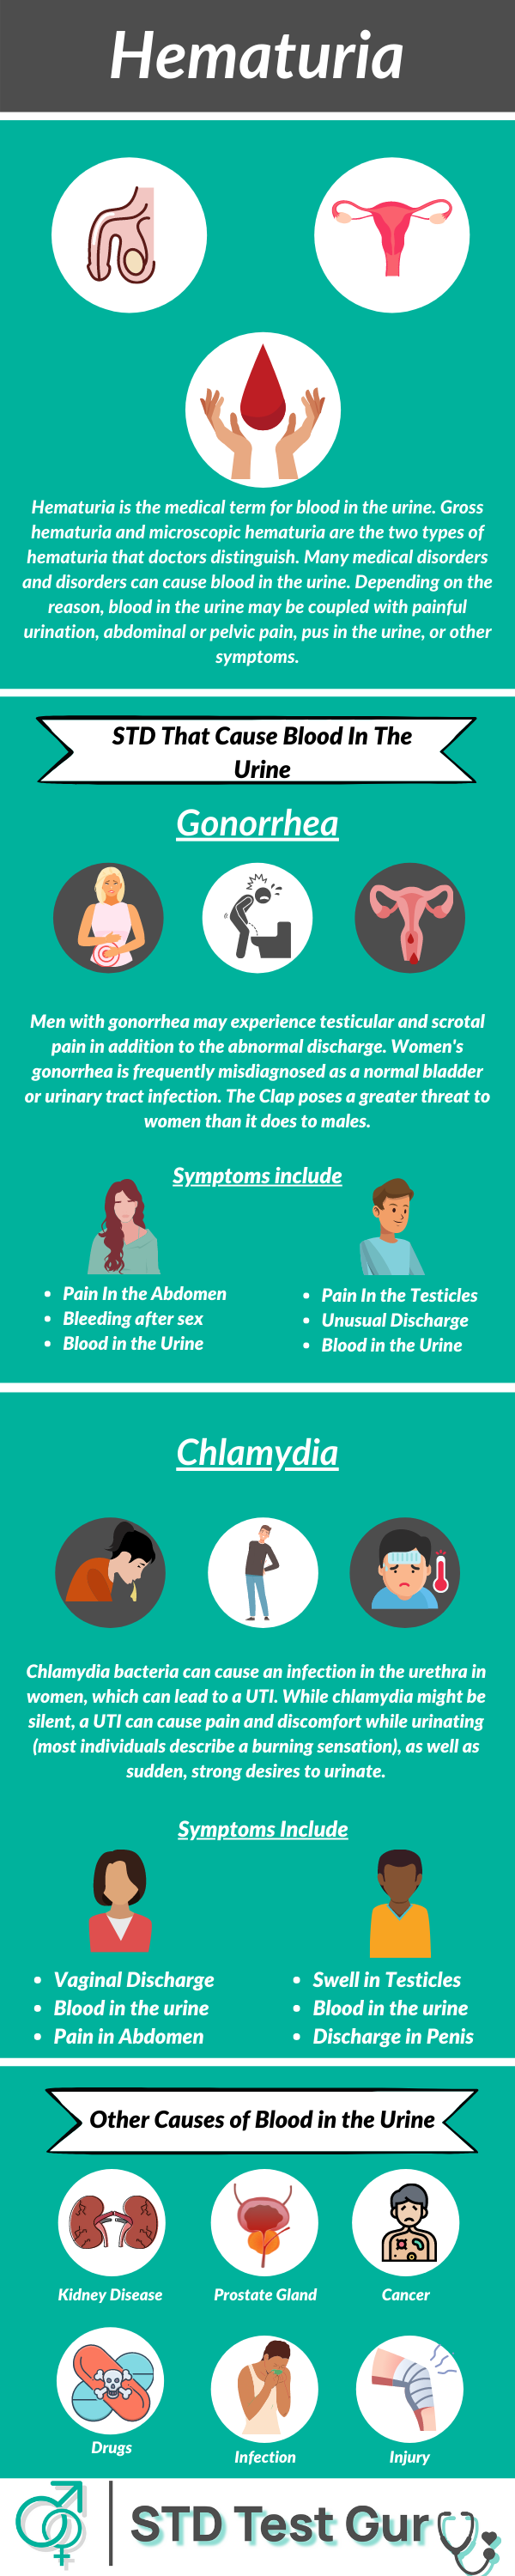 In this image, we explain about the STD that cause blood in the urine, its symptoms, treatment and more.